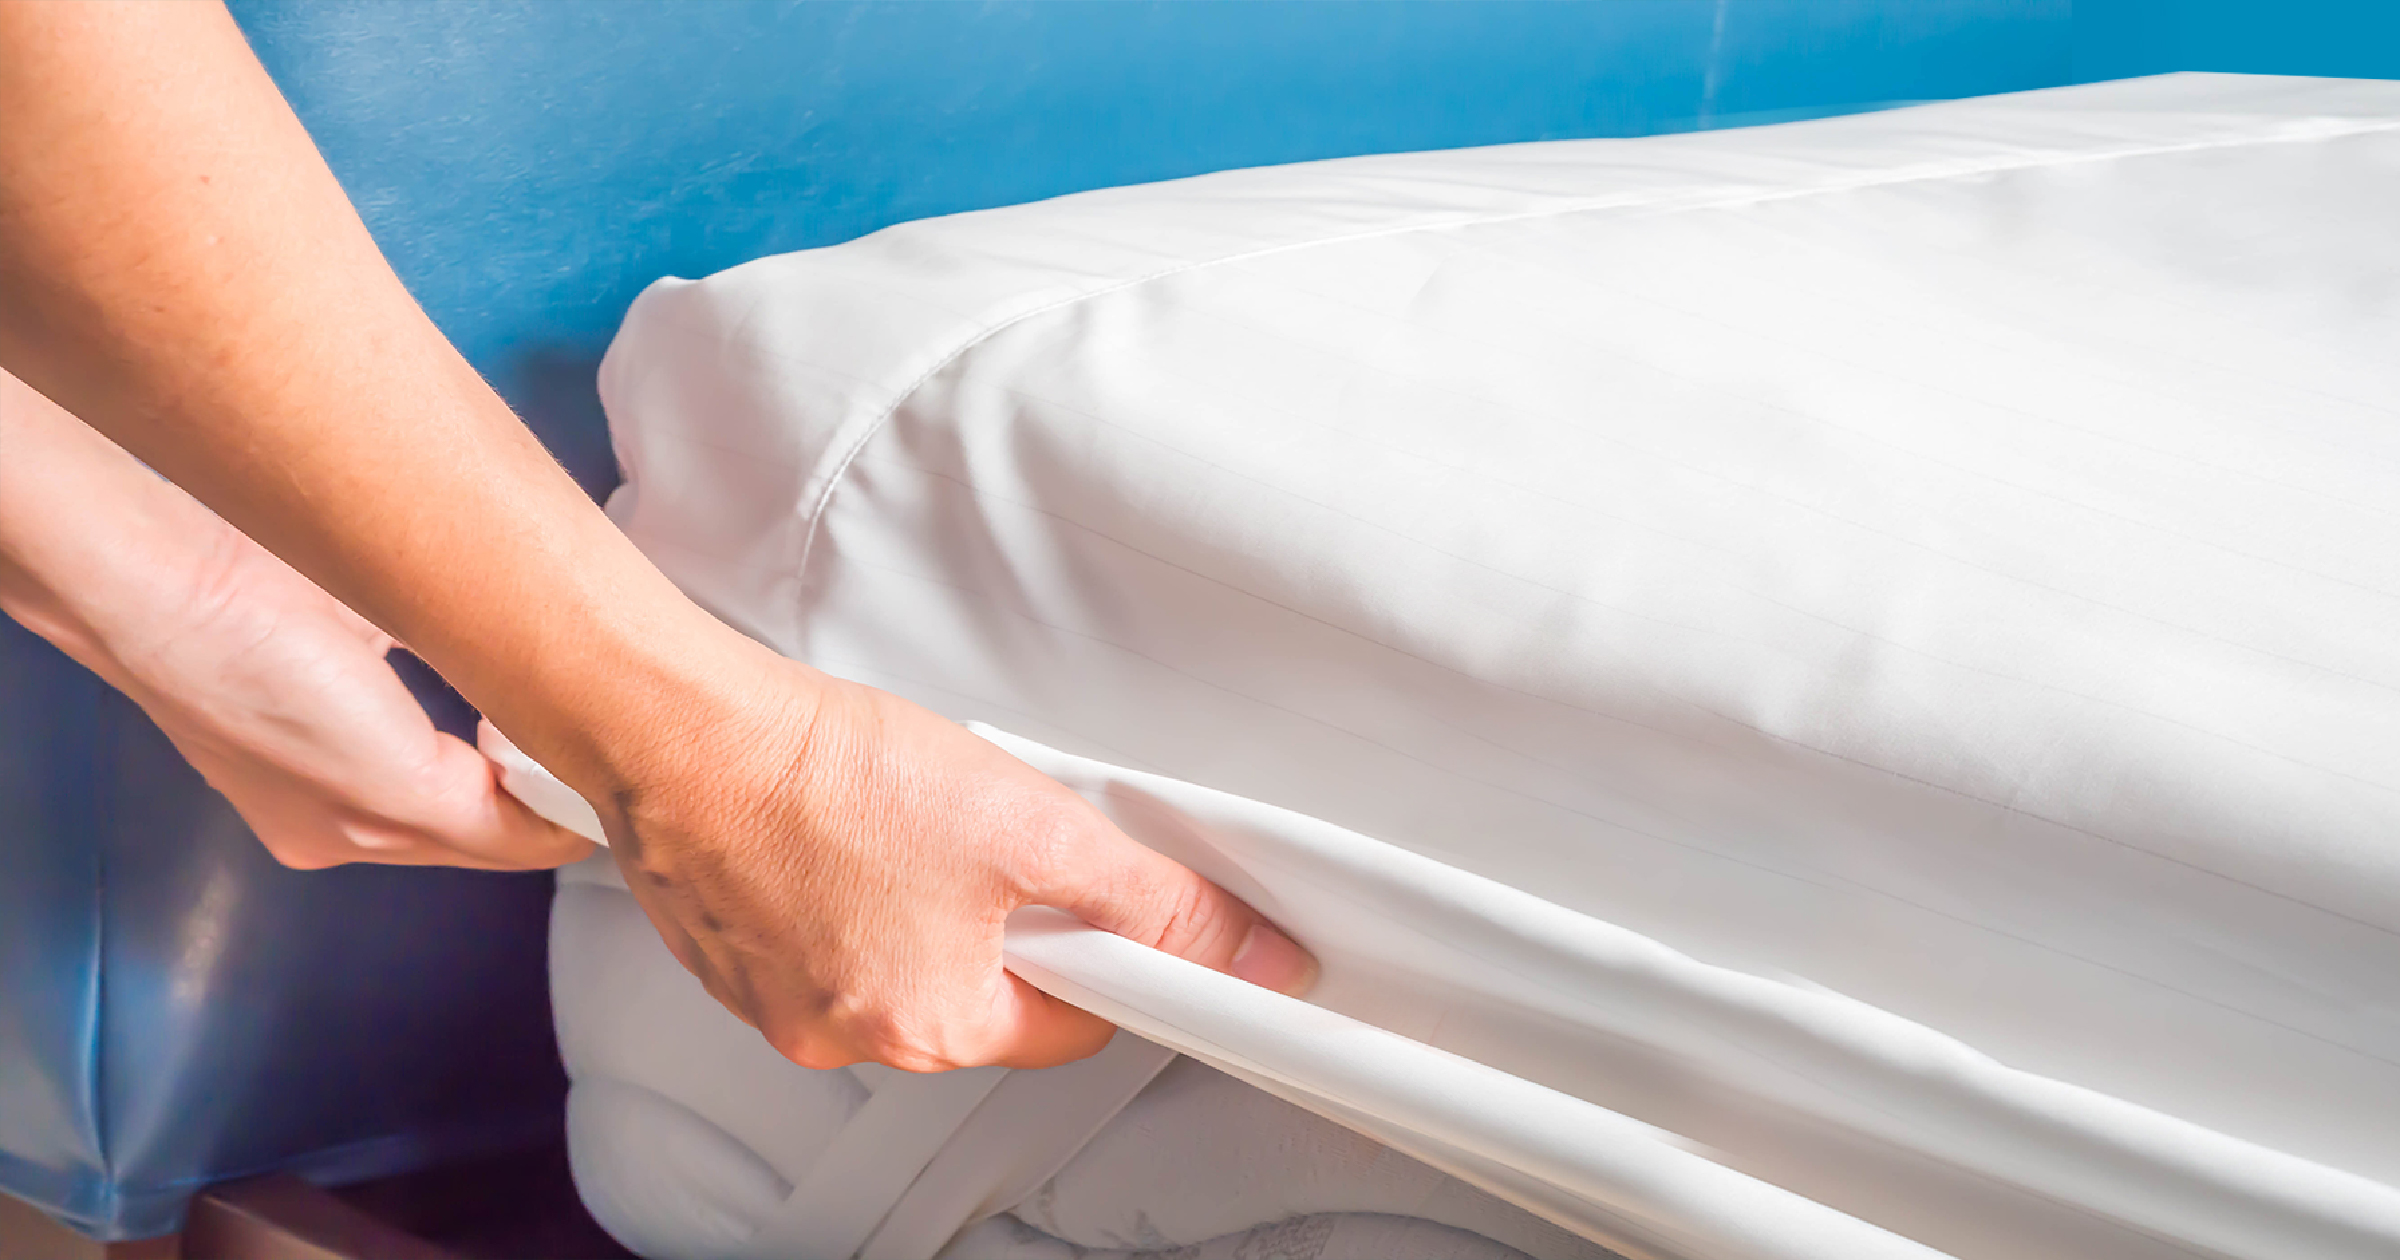 A GUIDE ON HOW TO PROPERLY CLEAN A COTTON MATTRESS